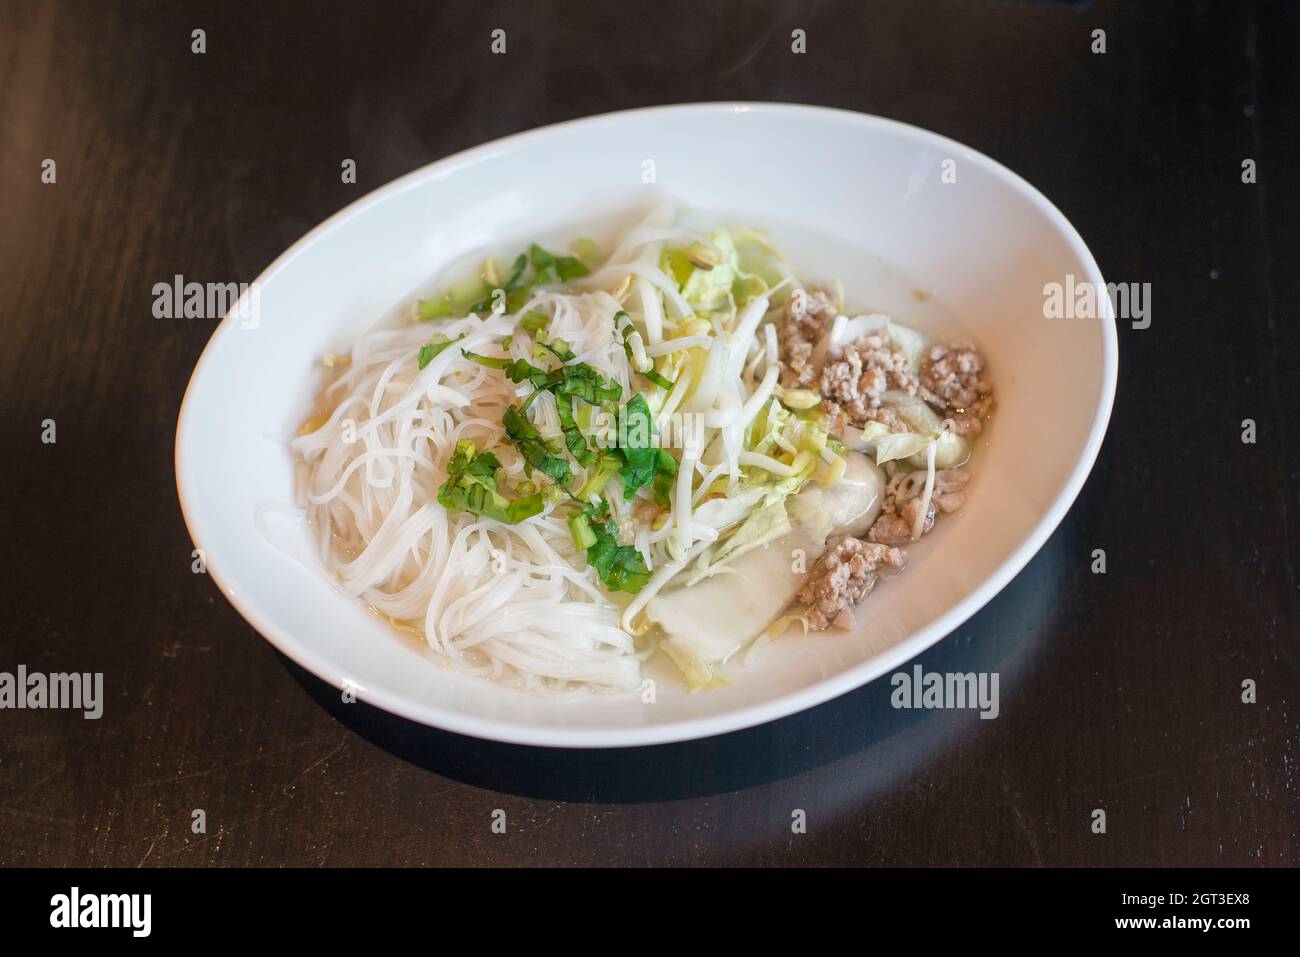 High Angle View Of Noodle Soup In Bowl Stock Photo